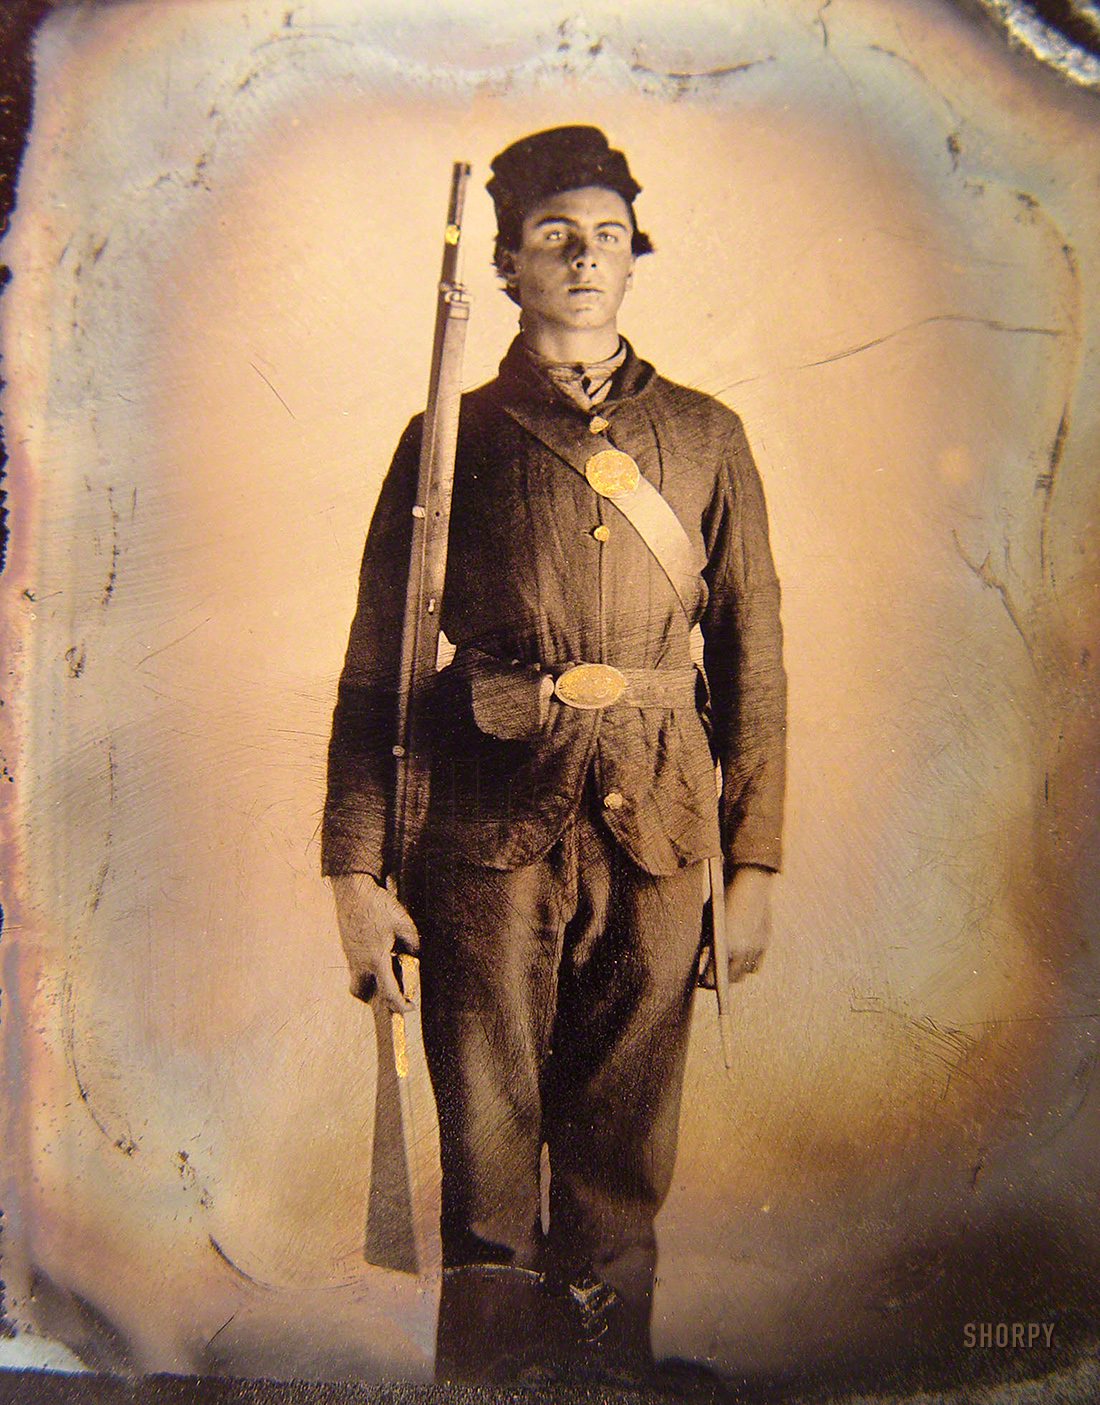 1861-65. "Soldier in Union uniform and cap box standing with musket and bayonet with scabbard." Sixth-plate tintype, hand-colored, removed from frame. Liljen&shy;quist Collection of Civil War Photographs, Library of Congress. View full size.